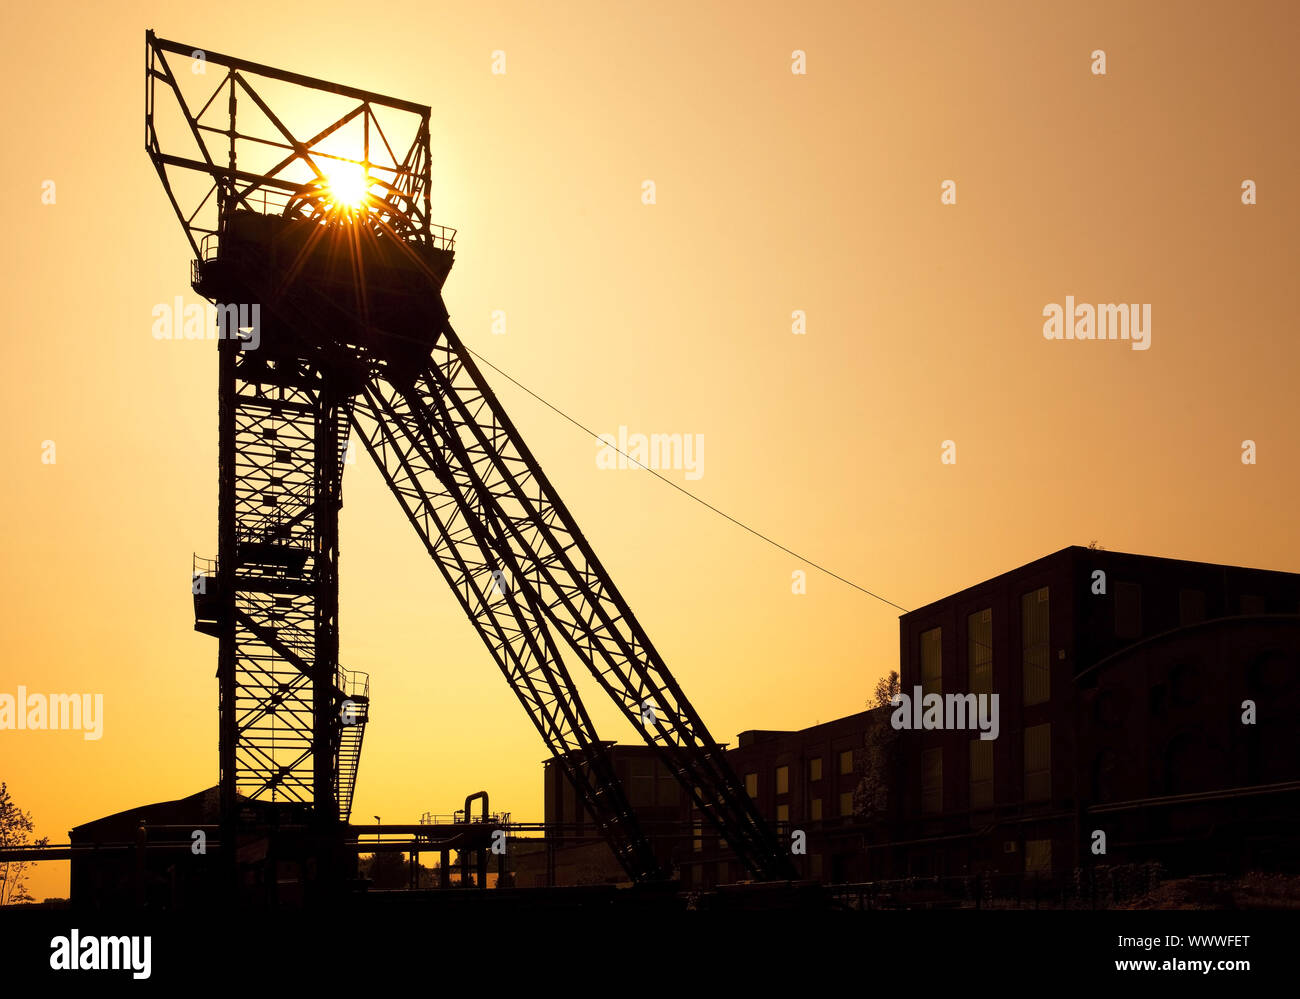 headframe of the colliery Auguste Victoria shaft 1/2, Marl, Ruhr Area, Germany, Europe Stock Photo